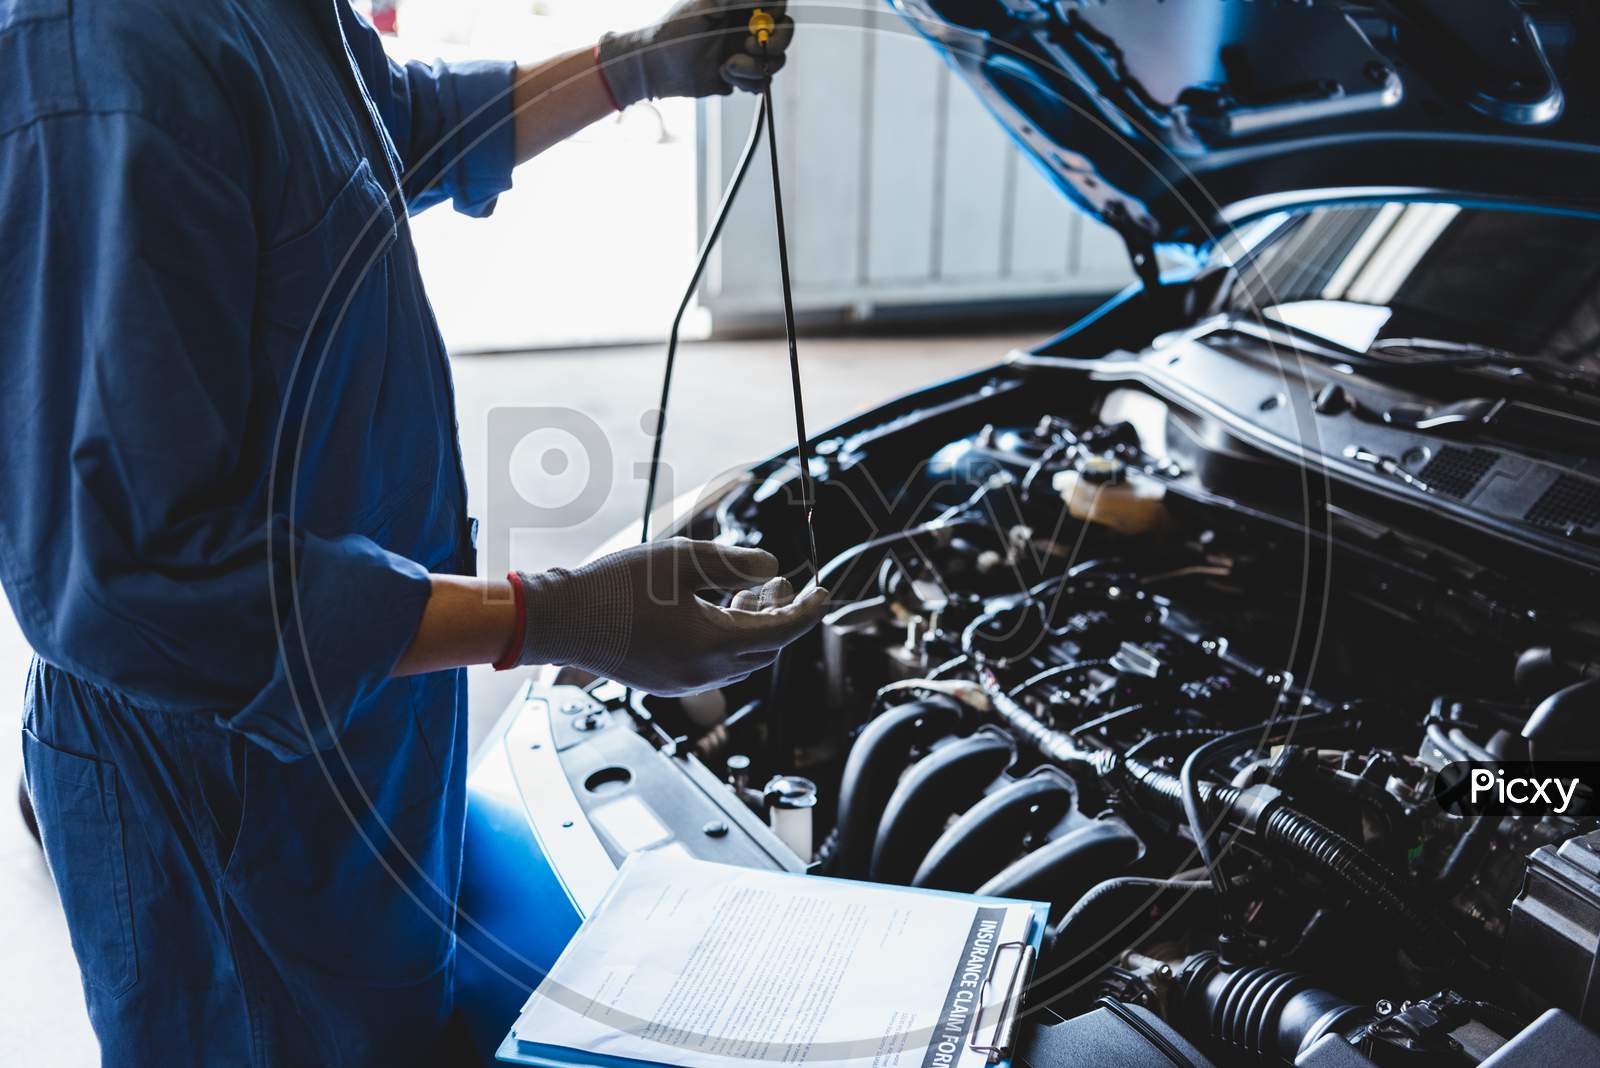 Car Mechanic Holding Checking Gear Oil To Maintenance Vehicle By Customer Claim Order In Auto Repair Shop Garage. Engine Repair Service. People Occupation And Business Job. Automobile Technician